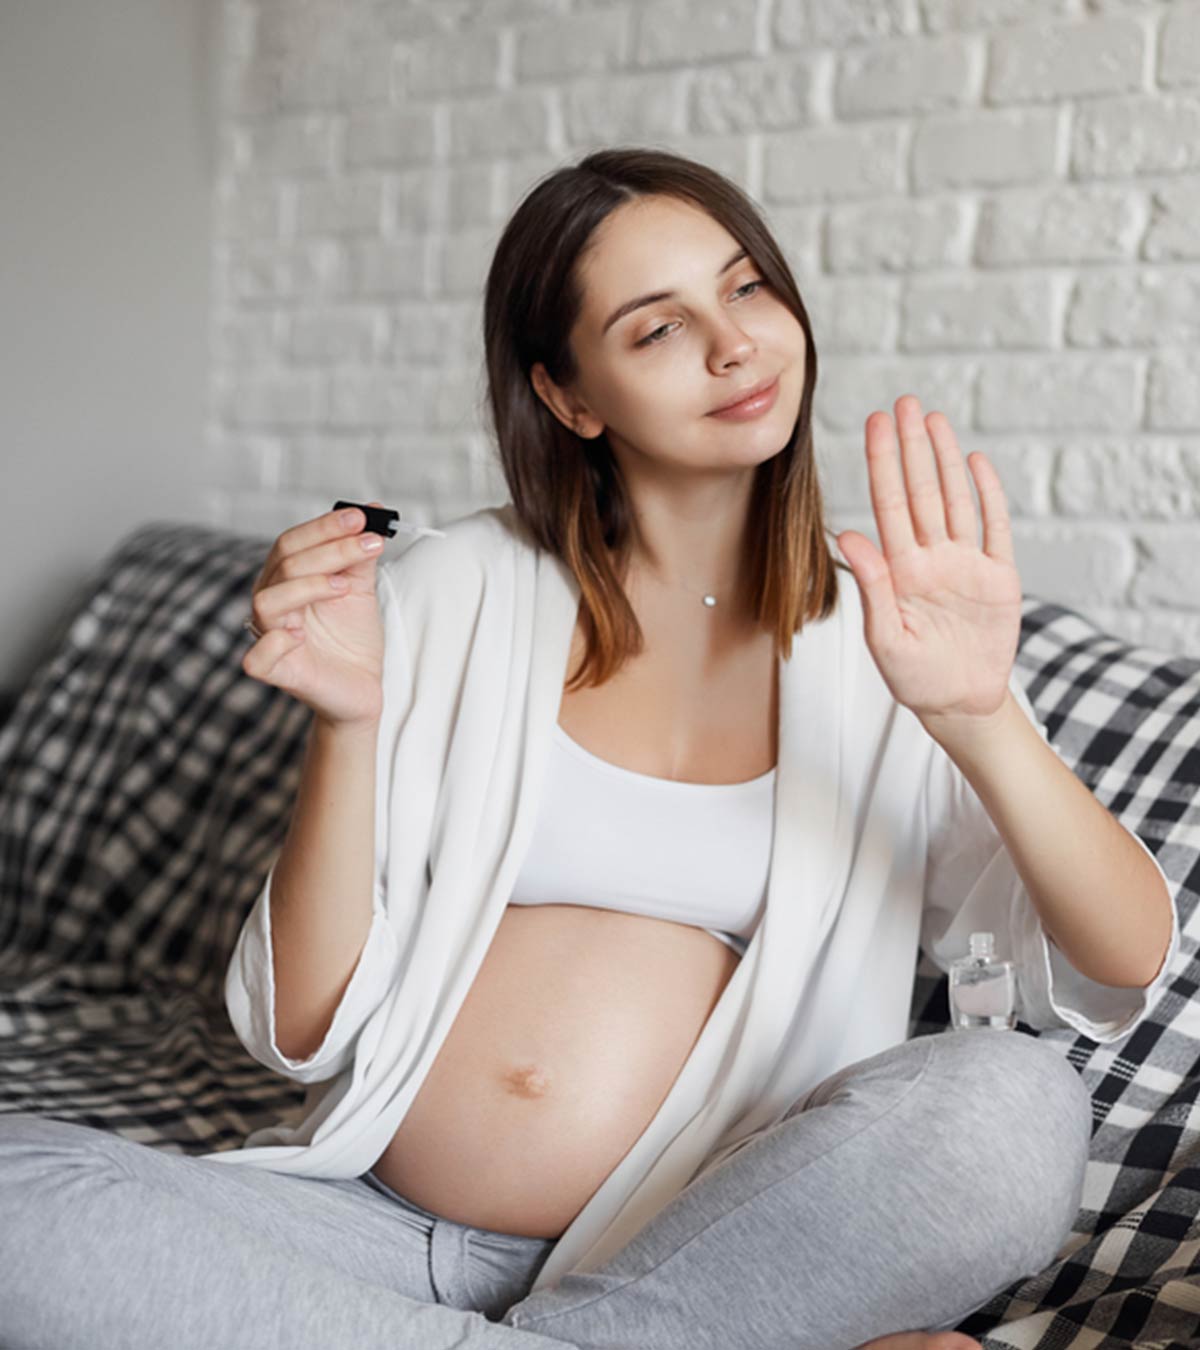 Is It Safe To Get Your Nails Done During Pregnancy?